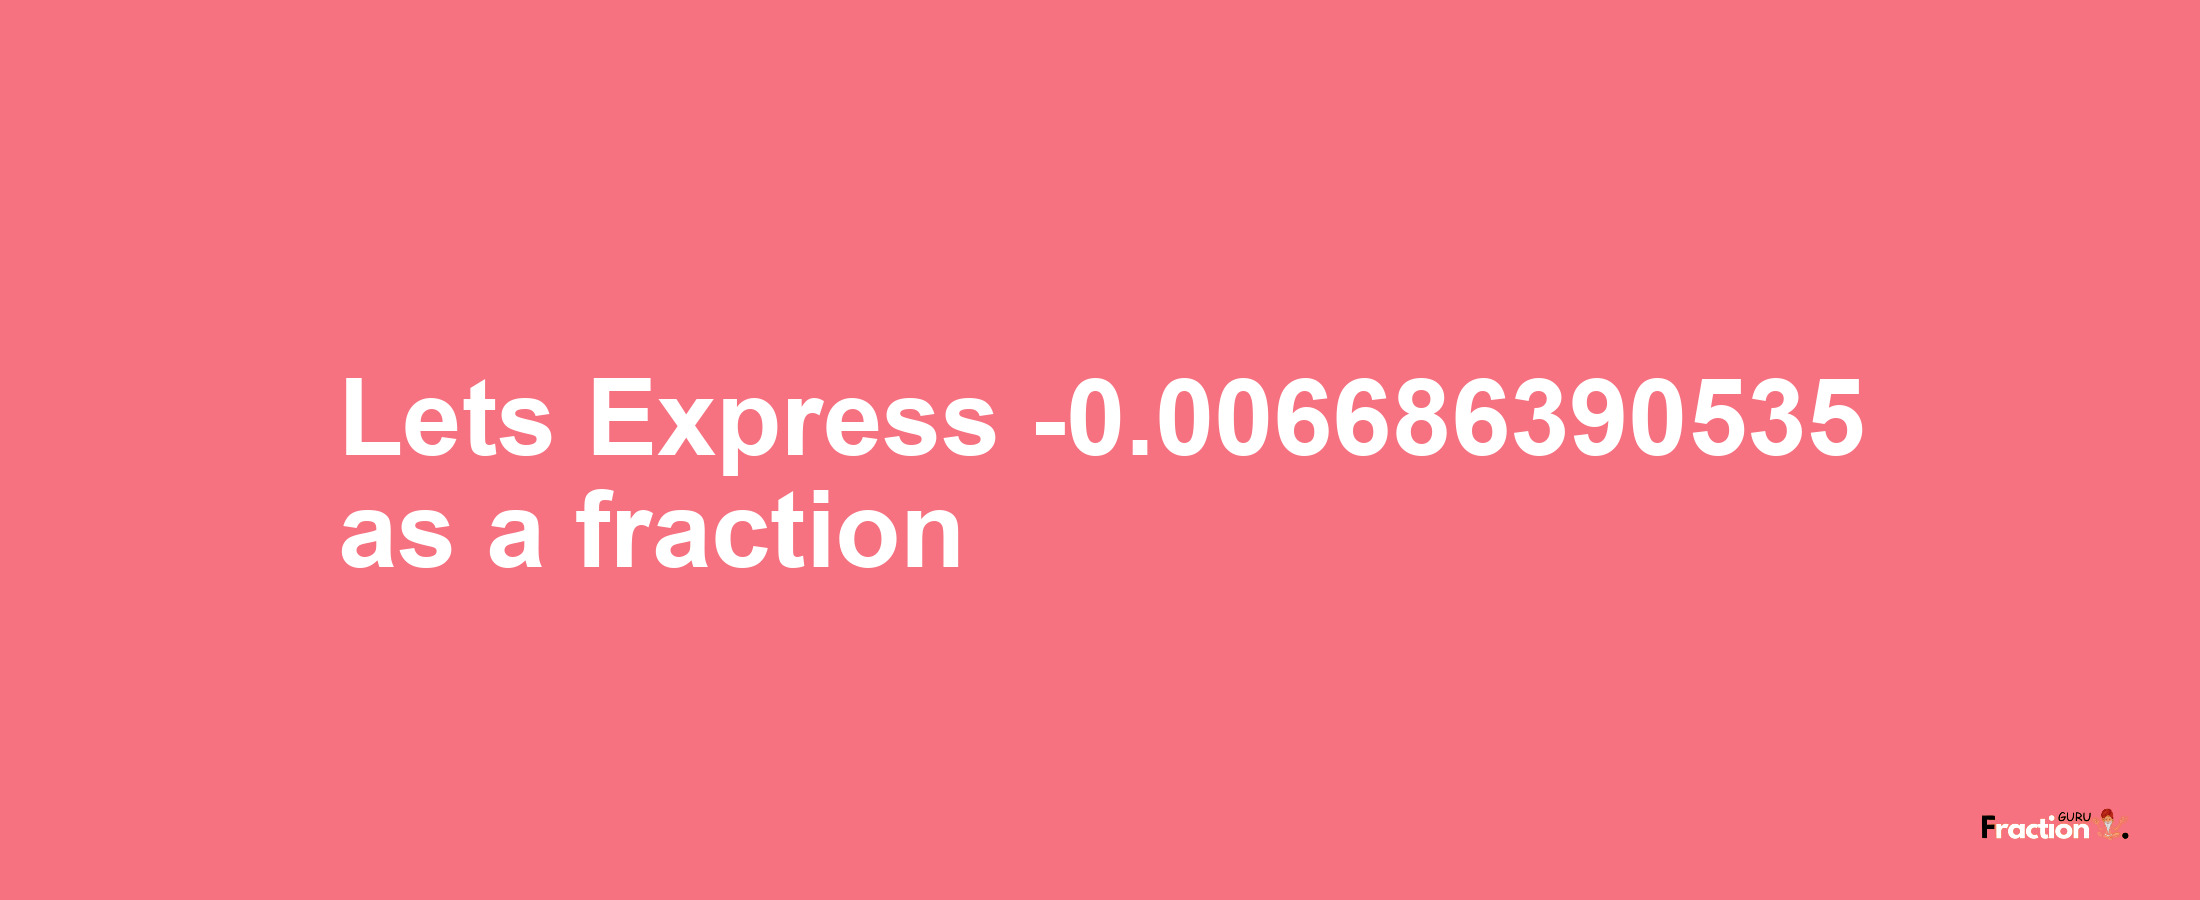 Lets Express -0.006686390535 as afraction